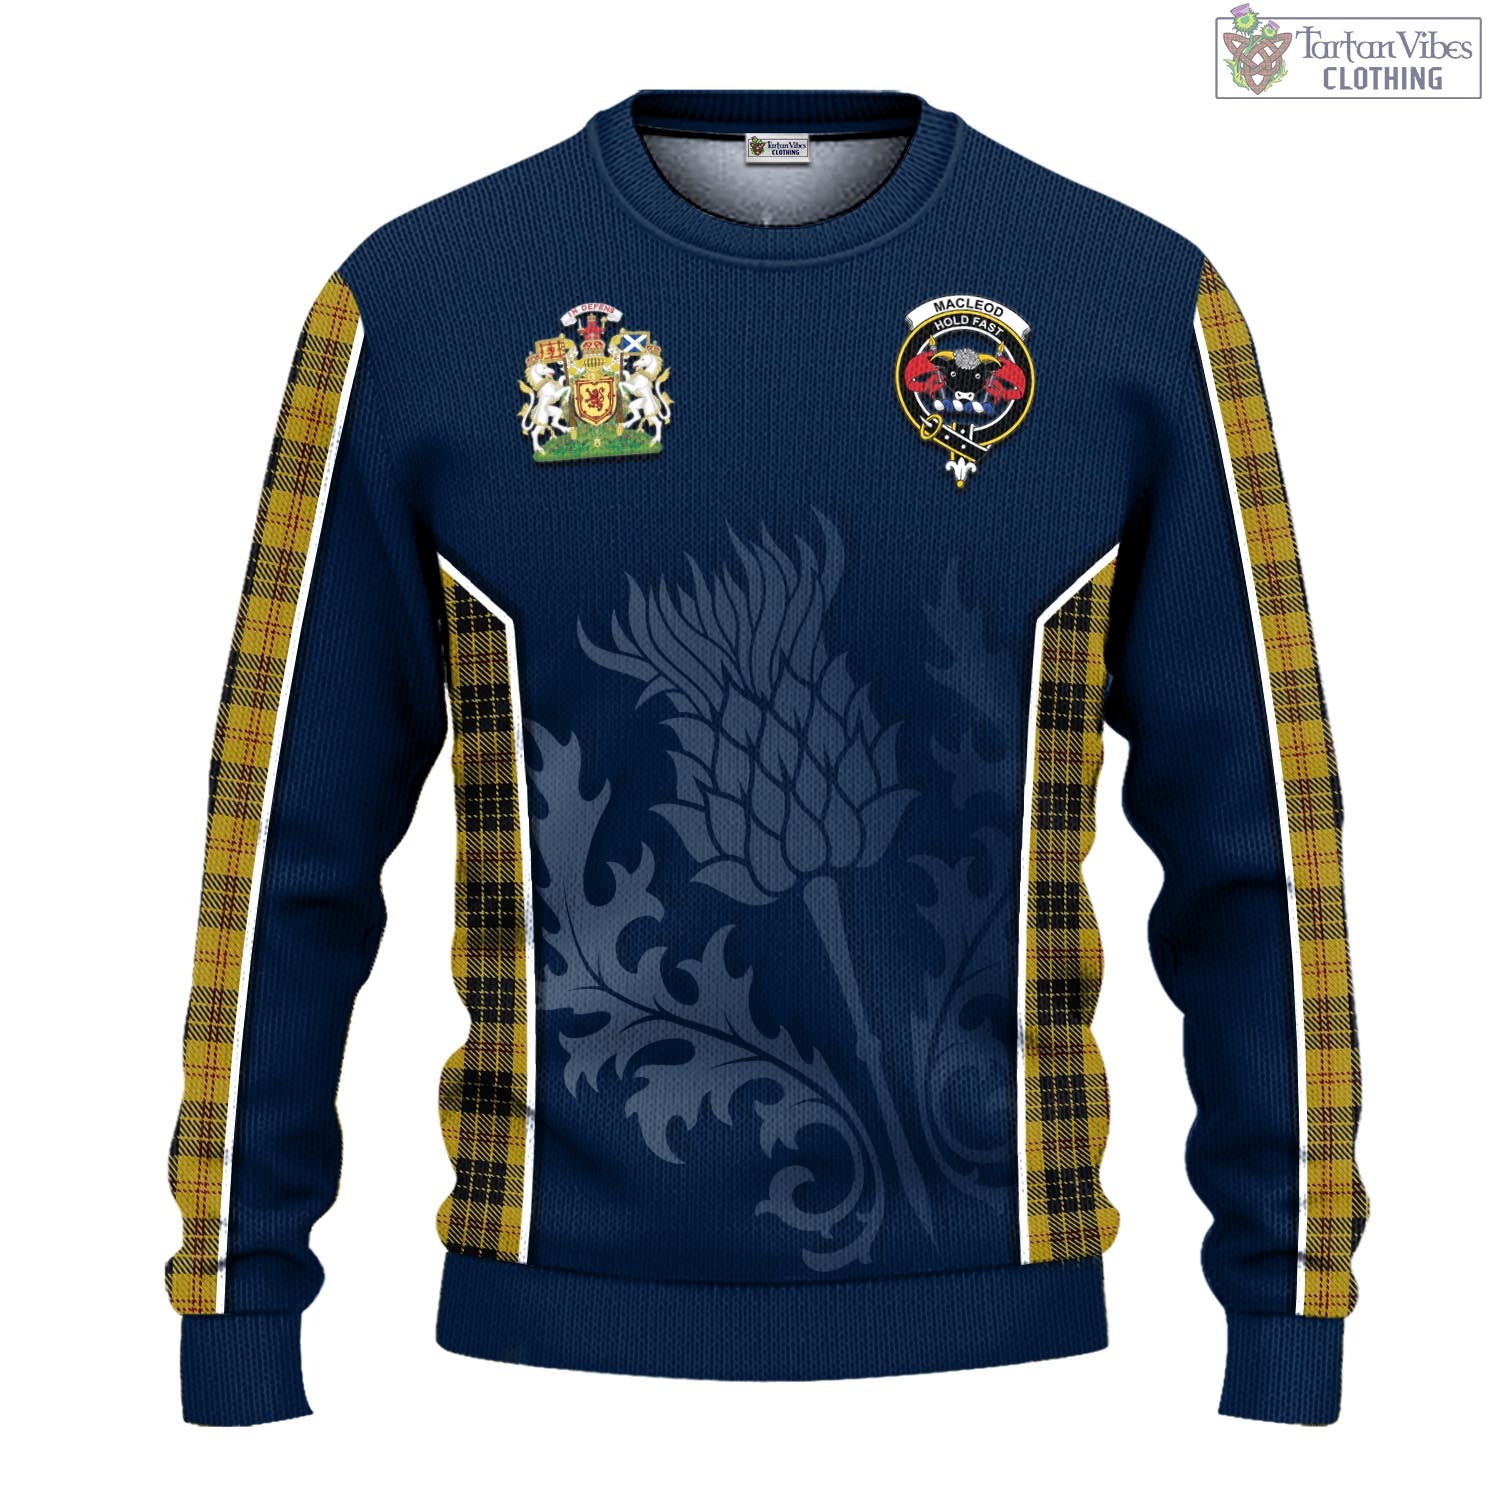 Tartan Vibes Clothing MacLeod Tartan Knitted Sweatshirt with Family Crest and Scottish Thistle Vibes Sport Style